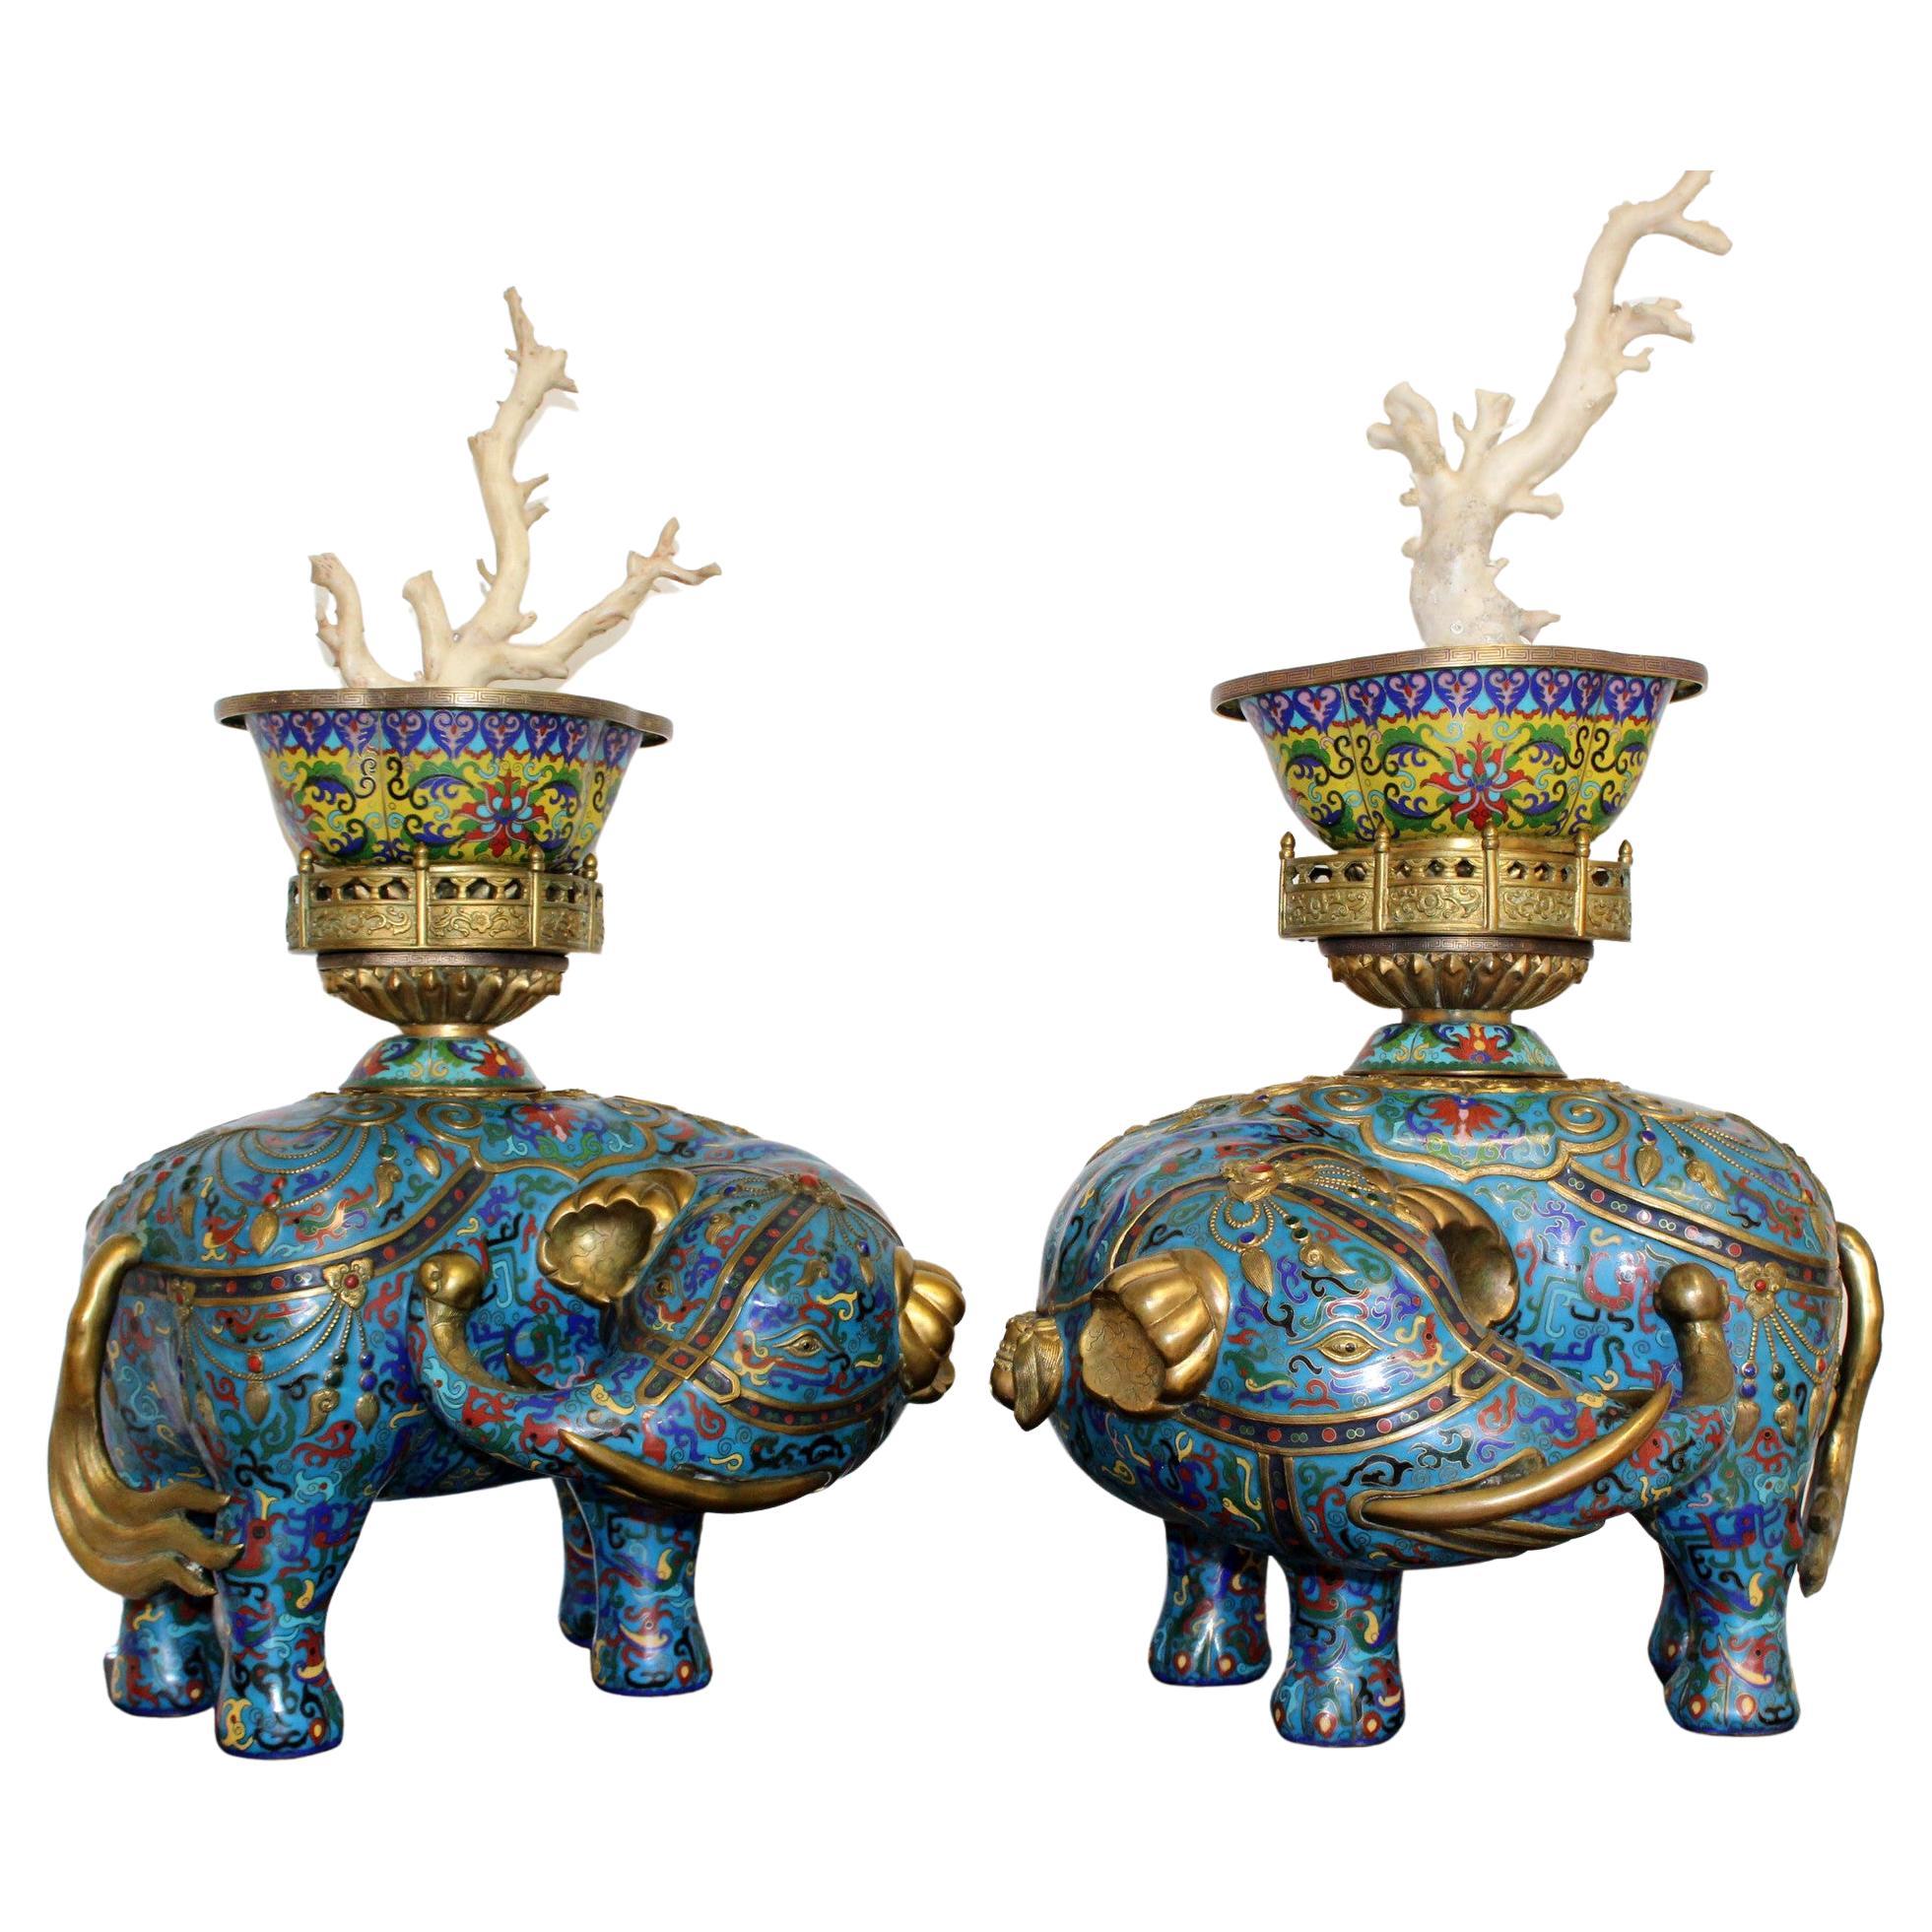 Pair of Monumental Antique Cloisonne Elephants with Branch Coral